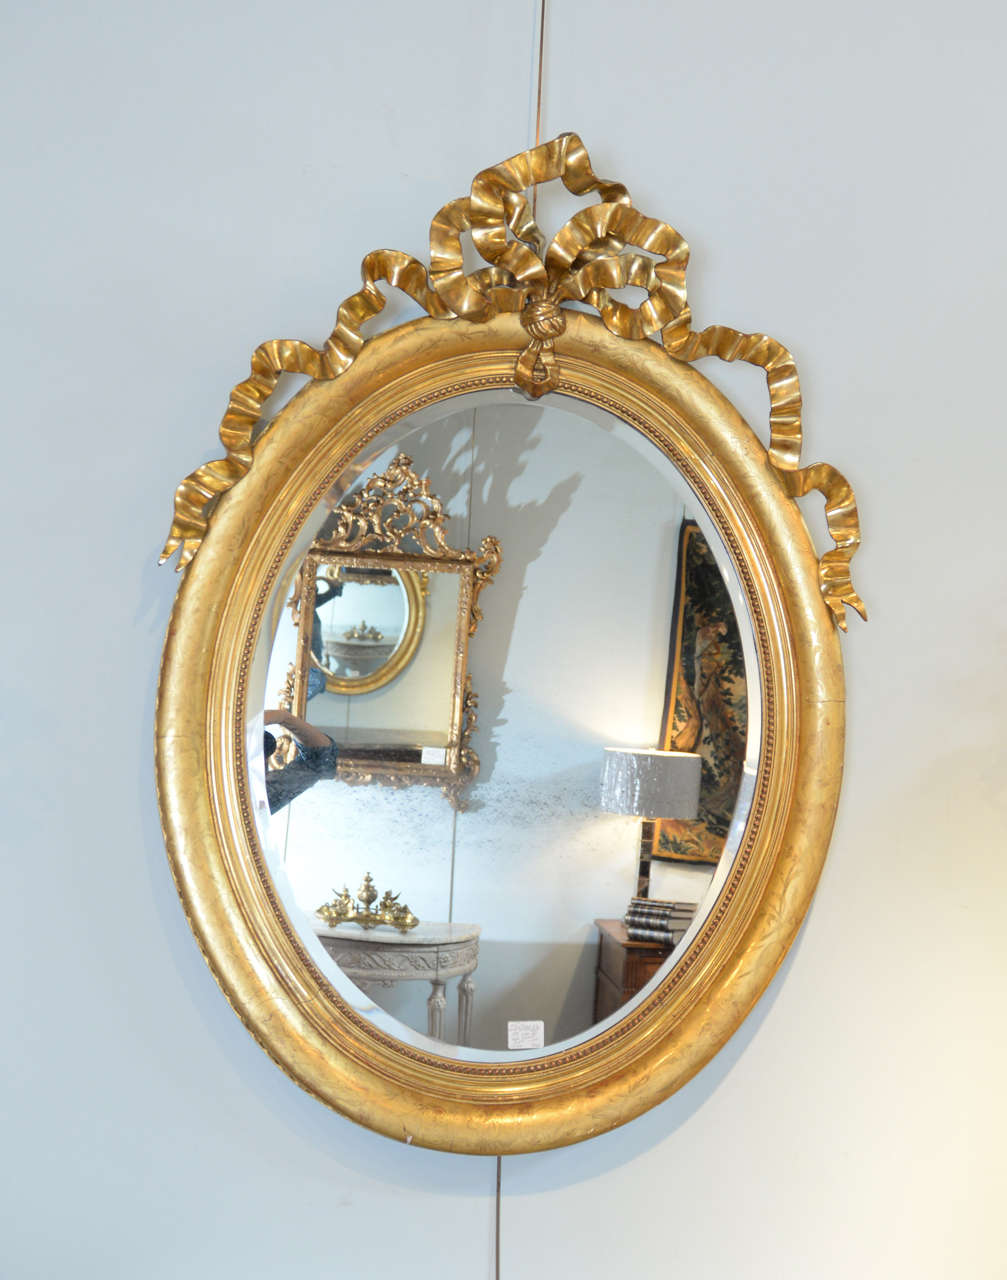 19th Century Louis XVI Gilt Mirror, Circa 1830
This gorgeous and graceful mirror has quite a presence.  The oval frame has a subtle and delicate etching in a flora and vine motif.  The proportions of the wide beaded frame and the elaborate bow that